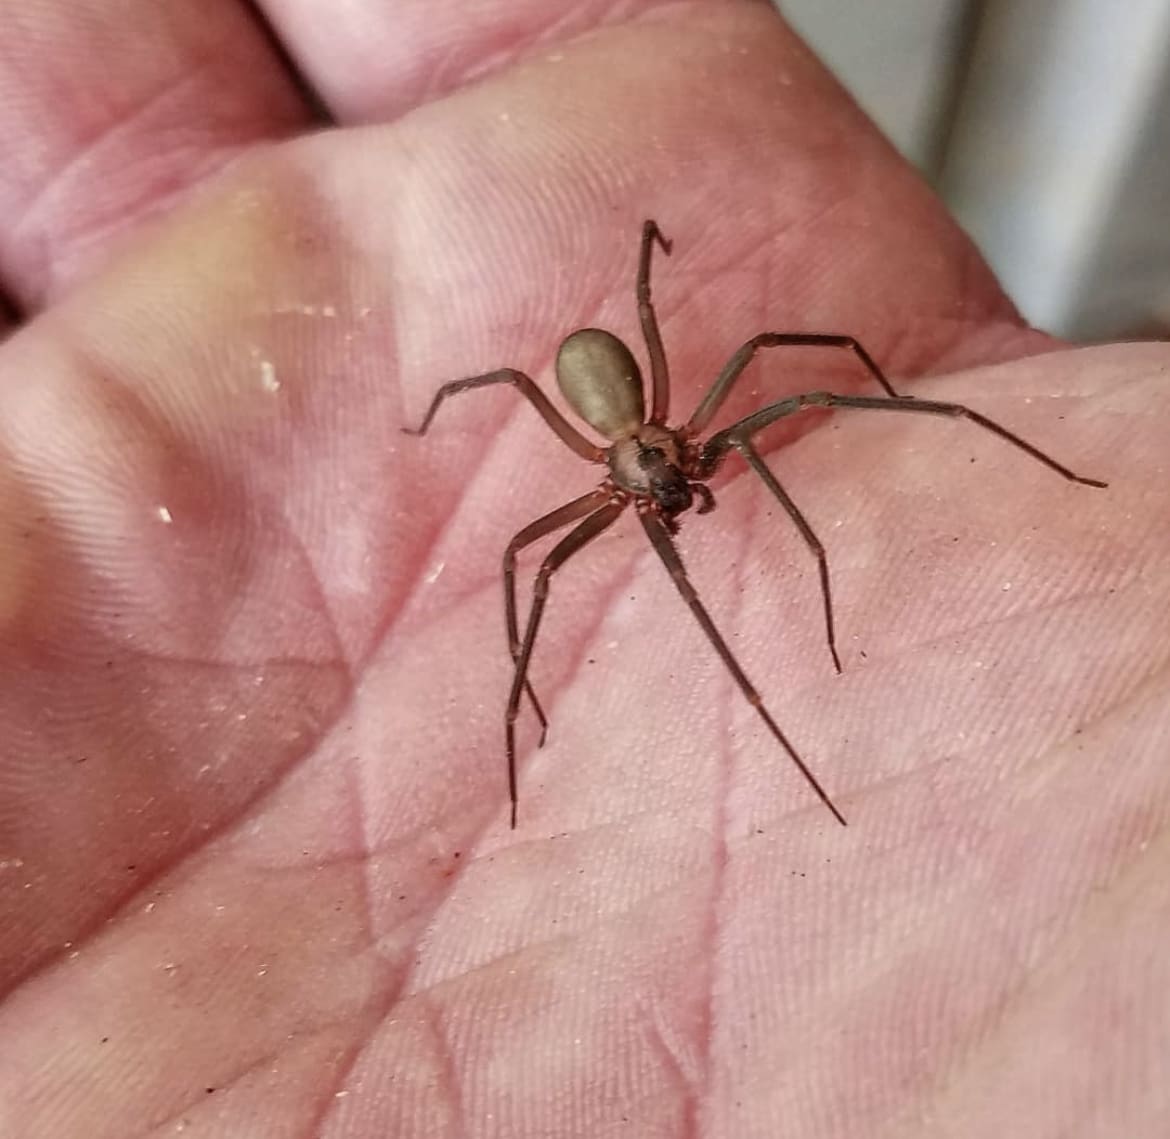 Brown Recluse Spider - Deadly Spiders of the World